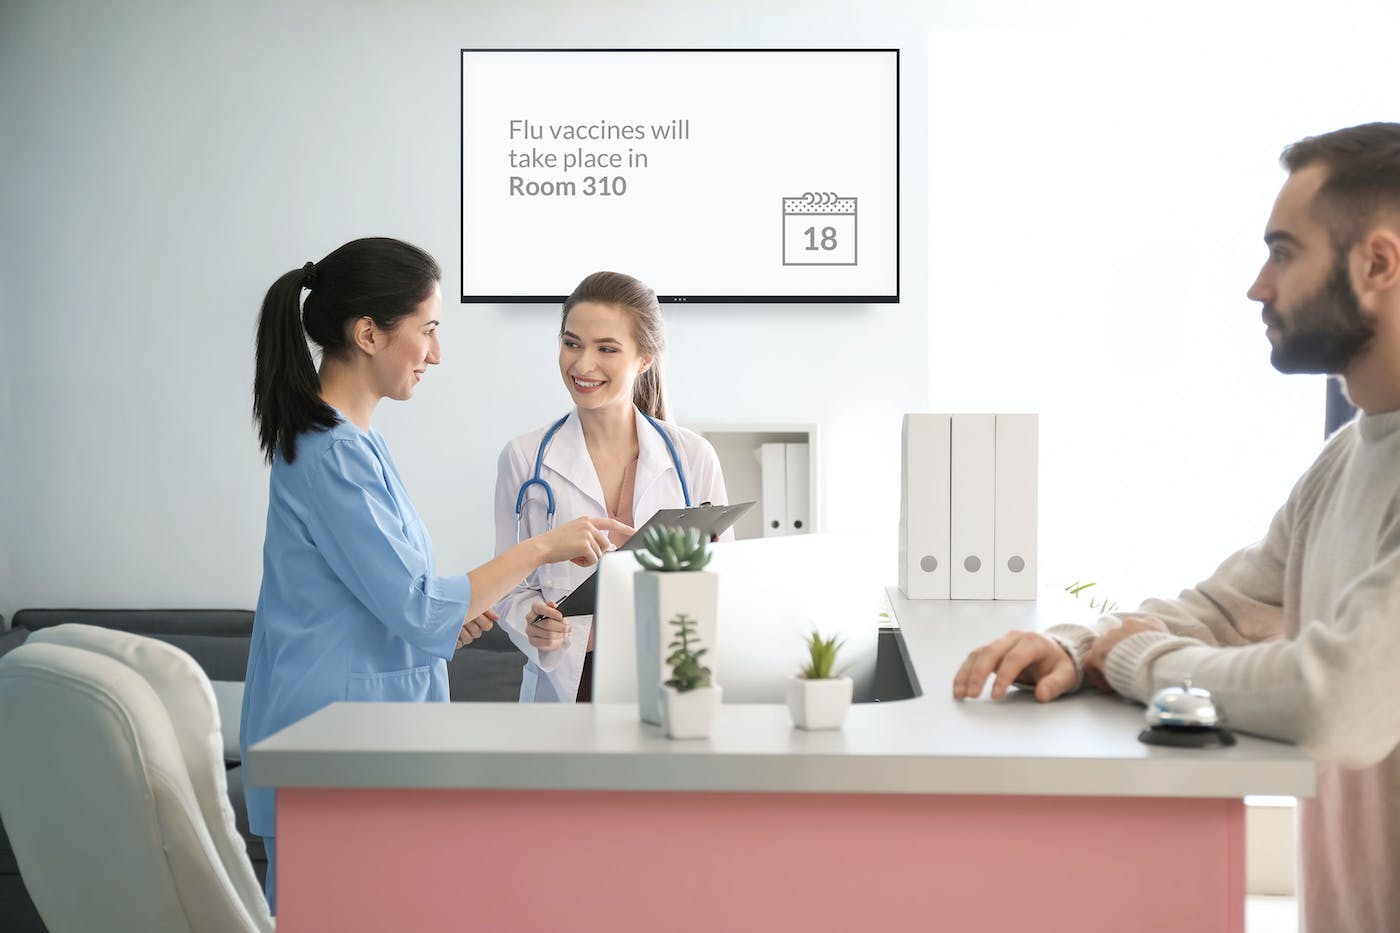 ScreenCloud Article - How Digital Signage Can Support Health Care and Hospital Workers 